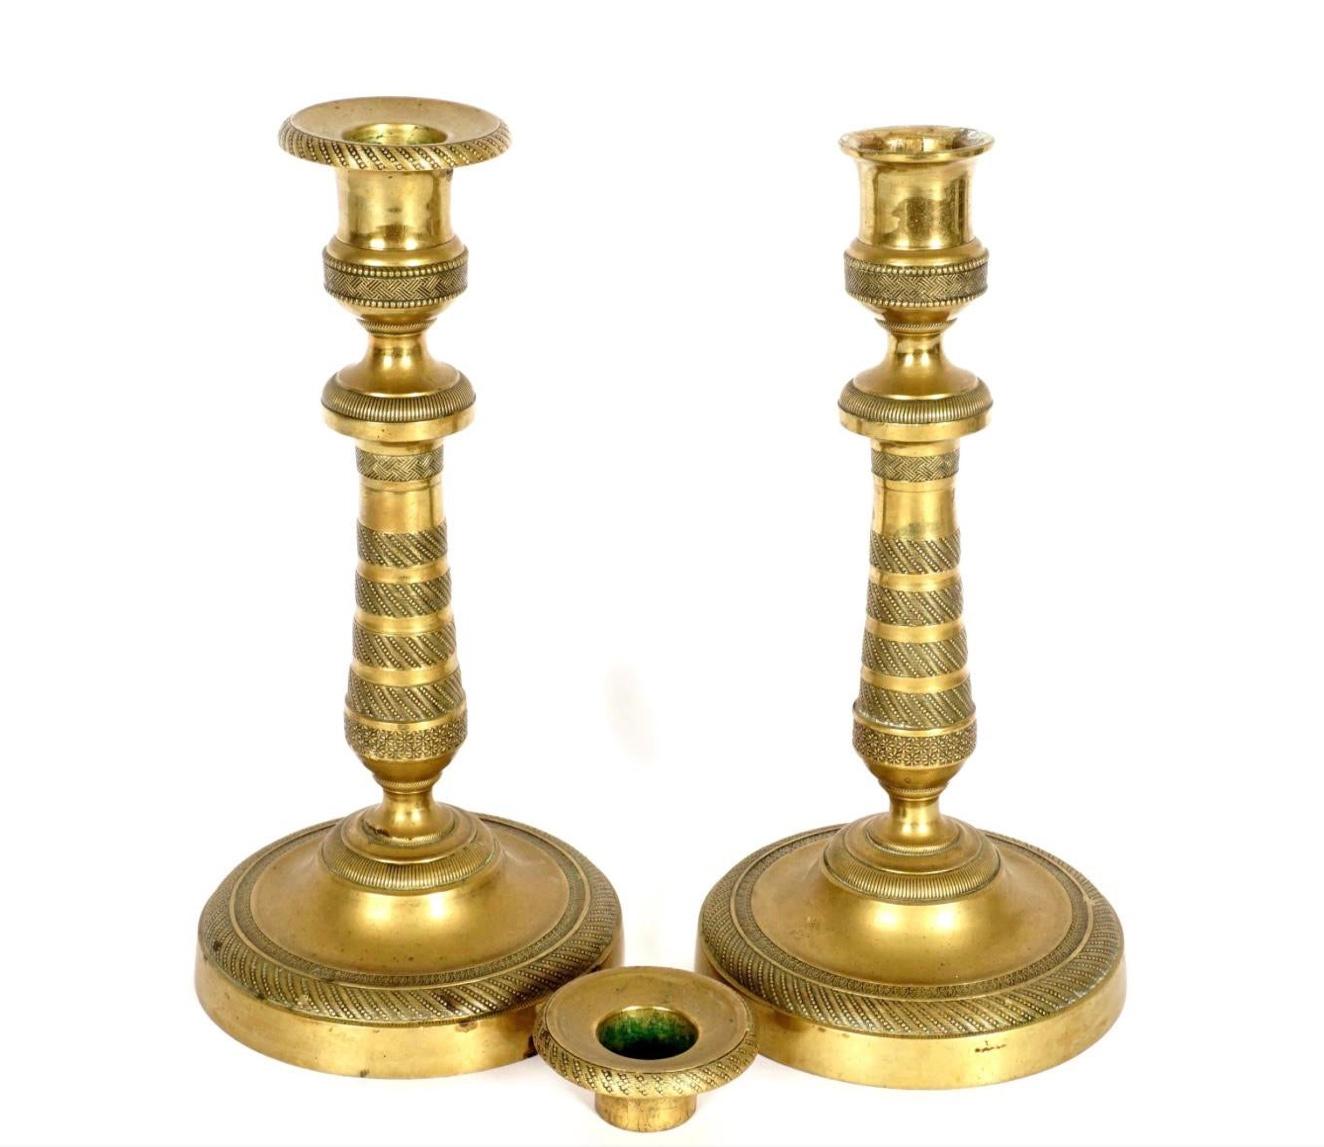 Pair French Empire brass oil lamp candle sticks. Hand blow glass reservoir, brass candlestick style base with bands of stippled and foliate decoration. Original patina. Very rare to find with the glass intact.